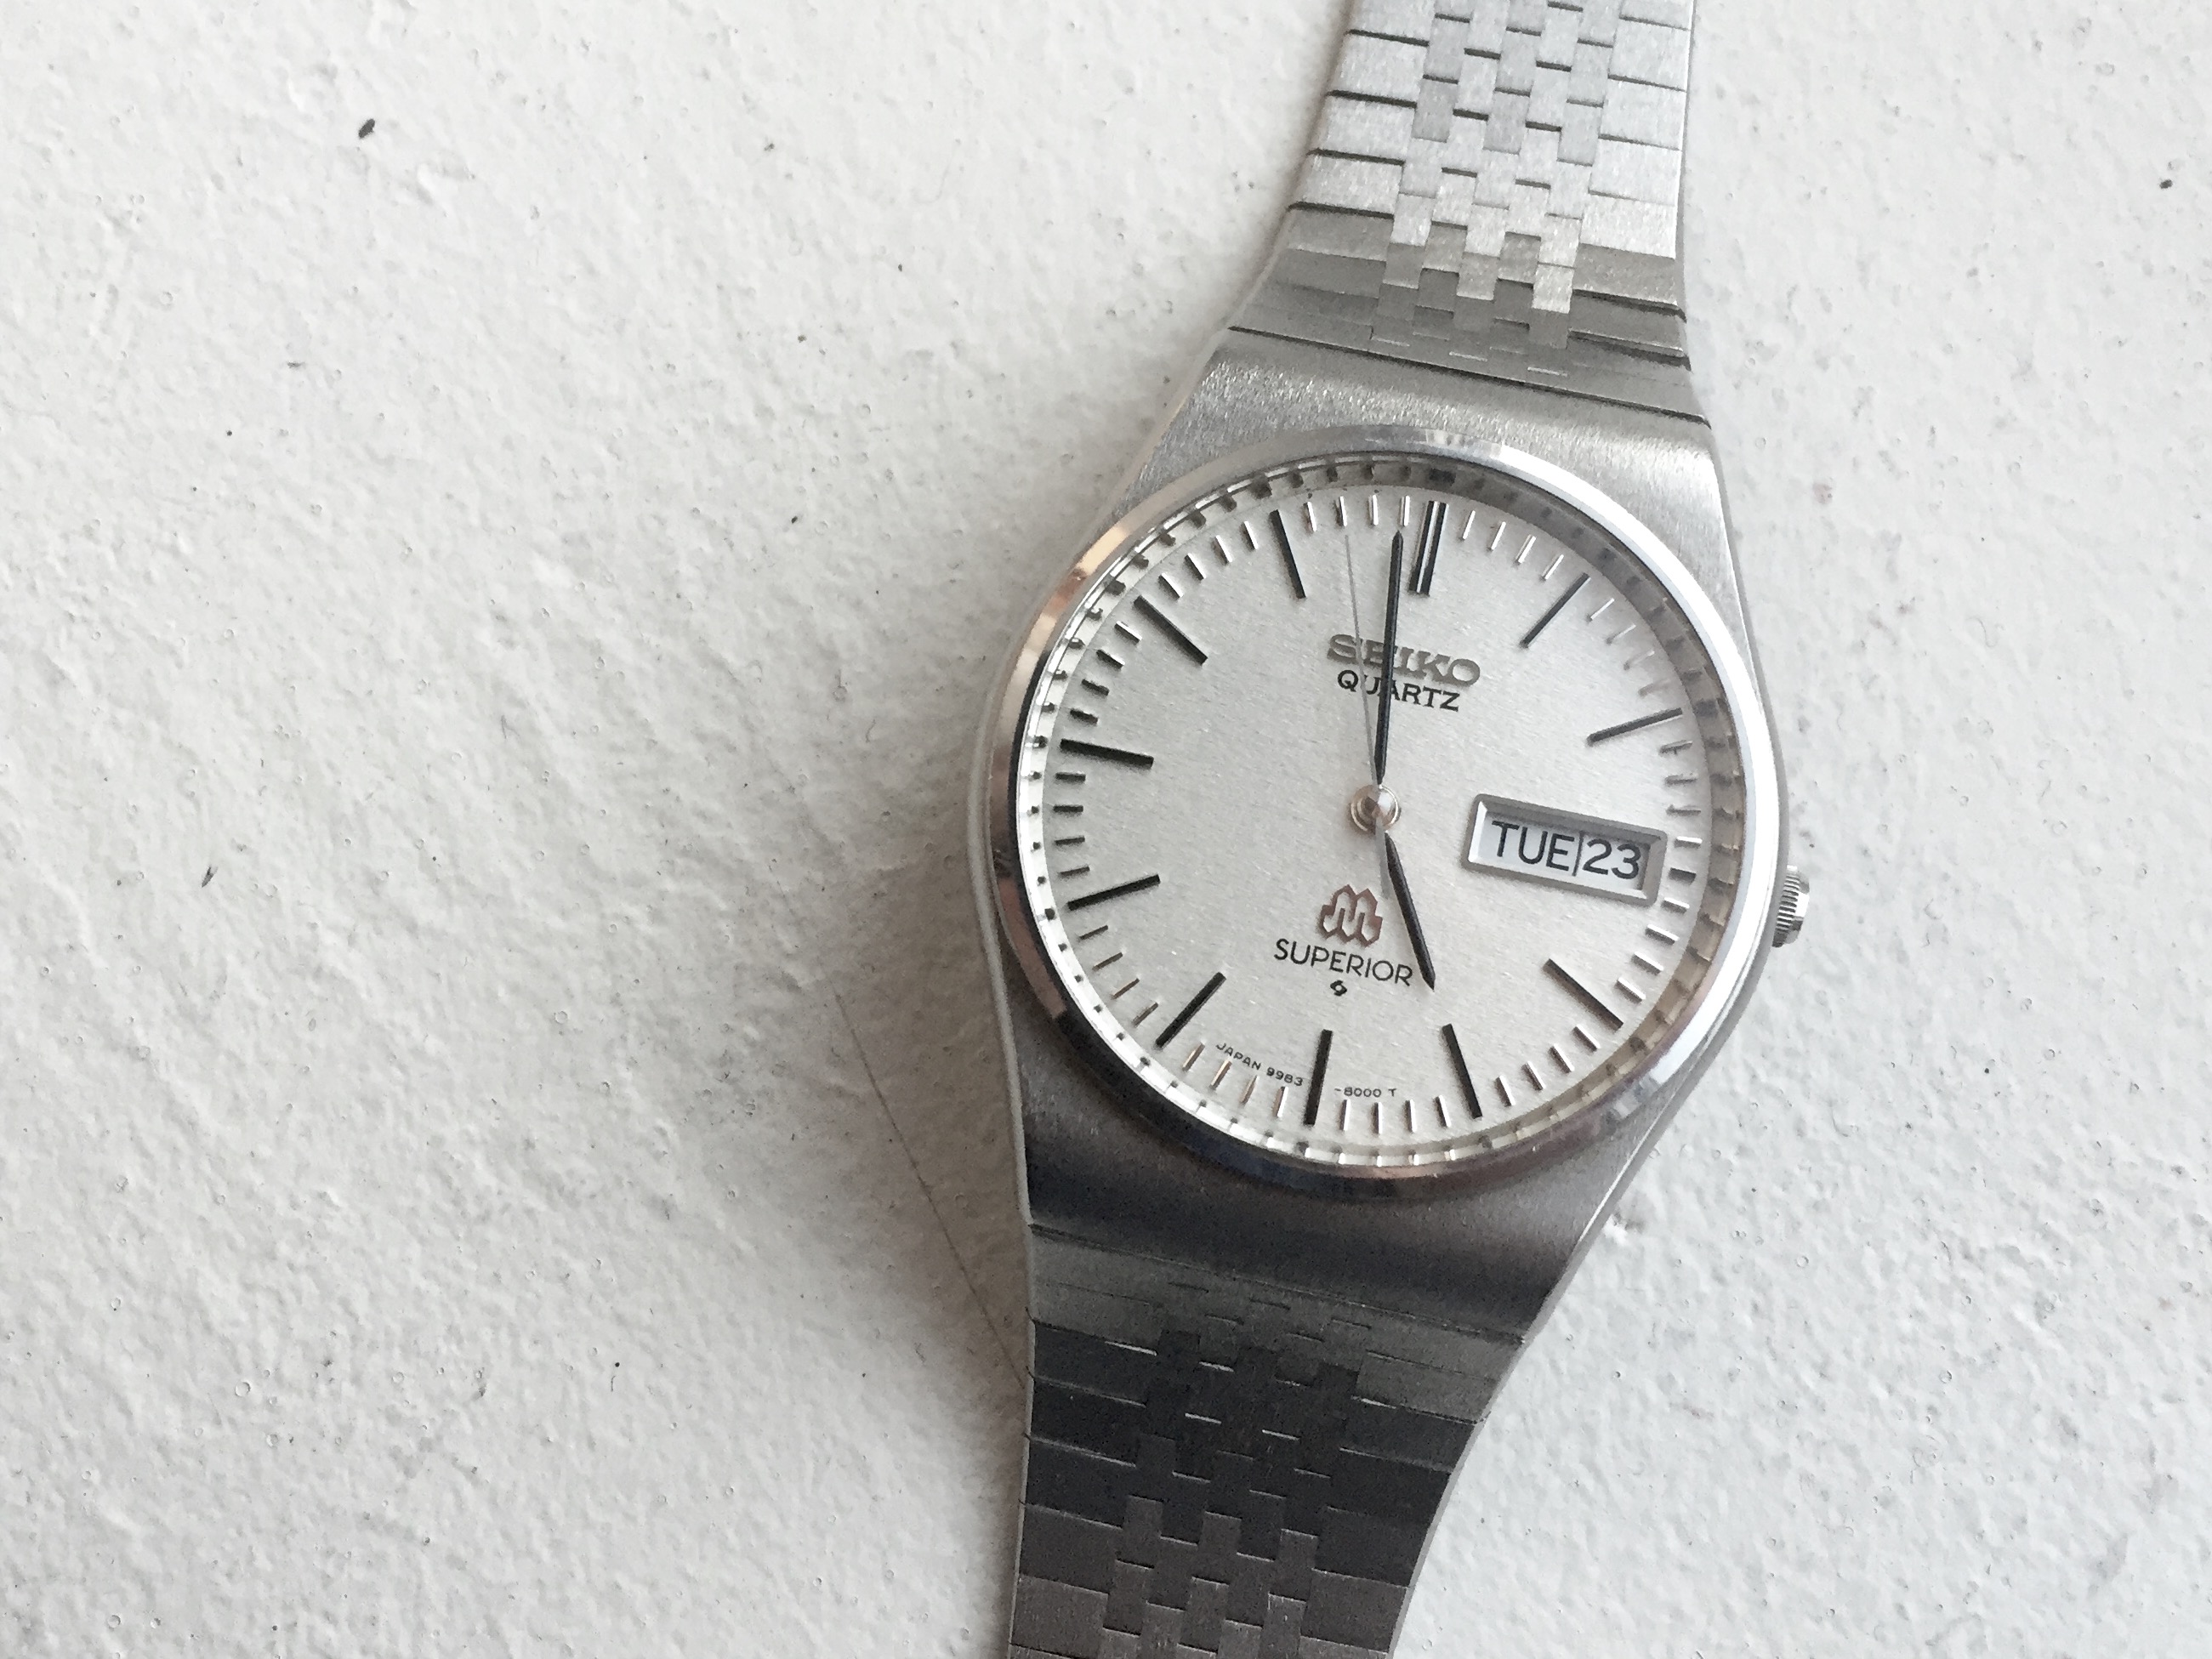 New arrival: SEIKO Superior 9983-8000 – yonsson – Watches, inside and out